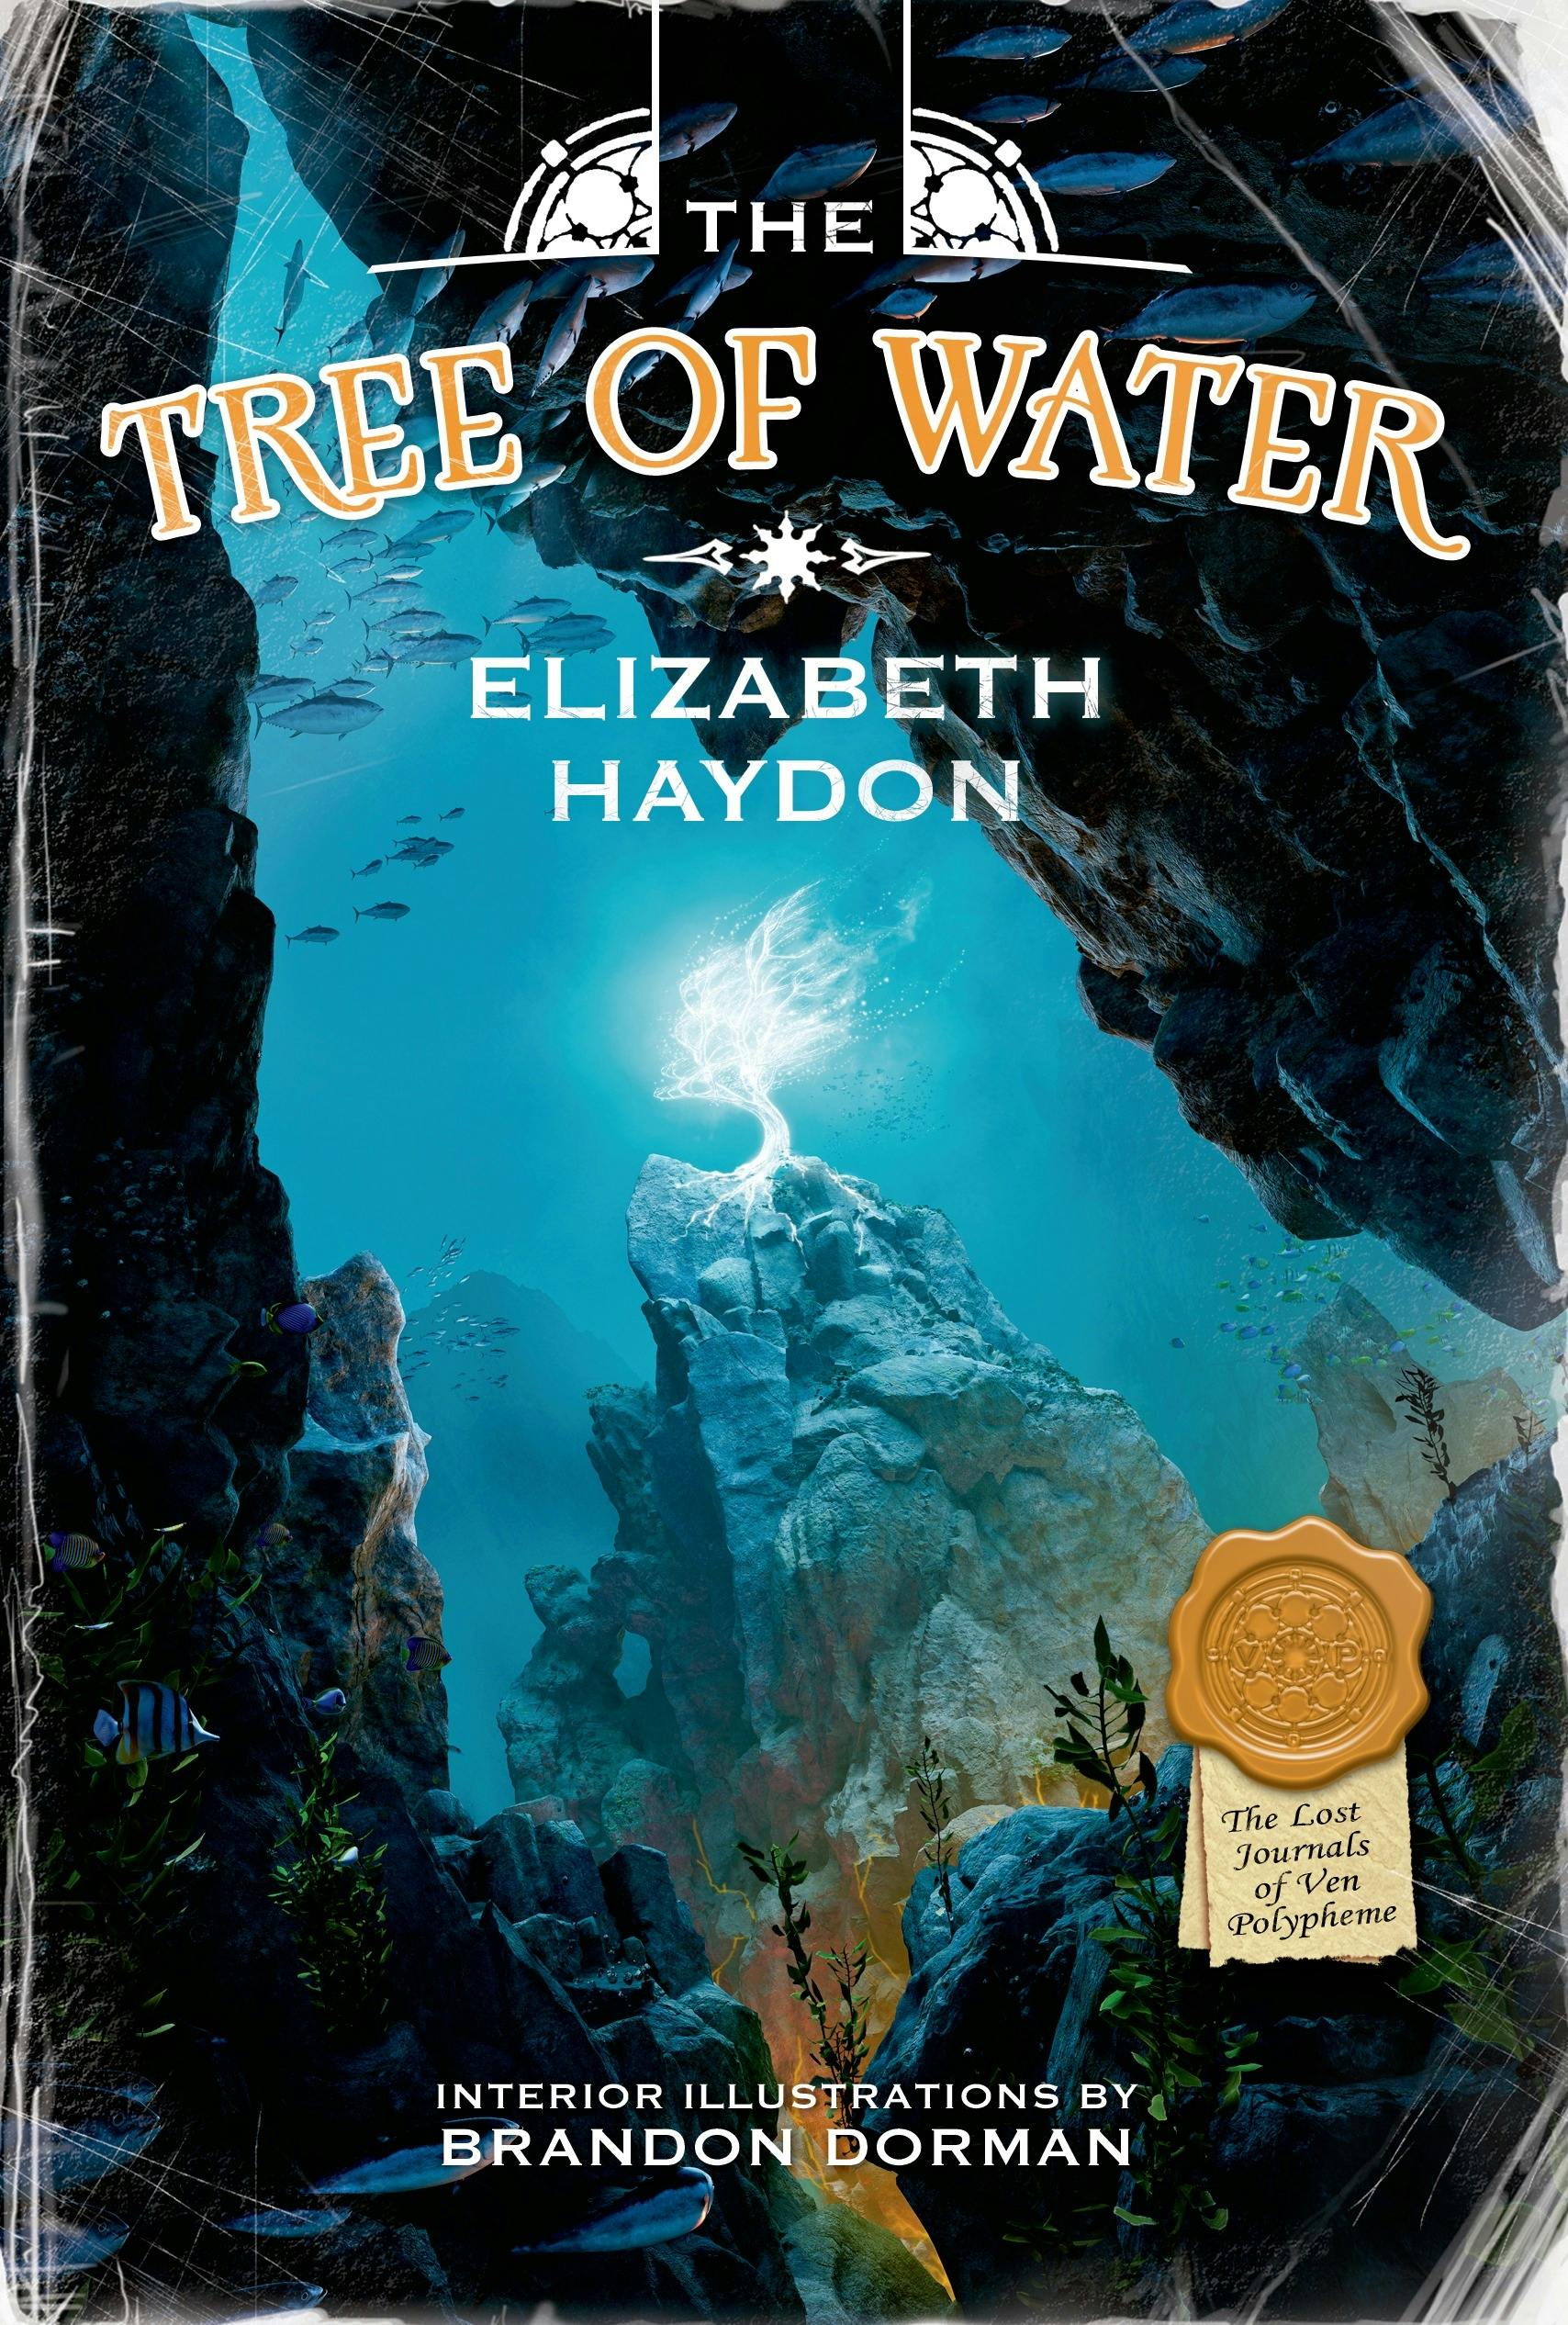 Cover for the book titled as: The Tree of Water